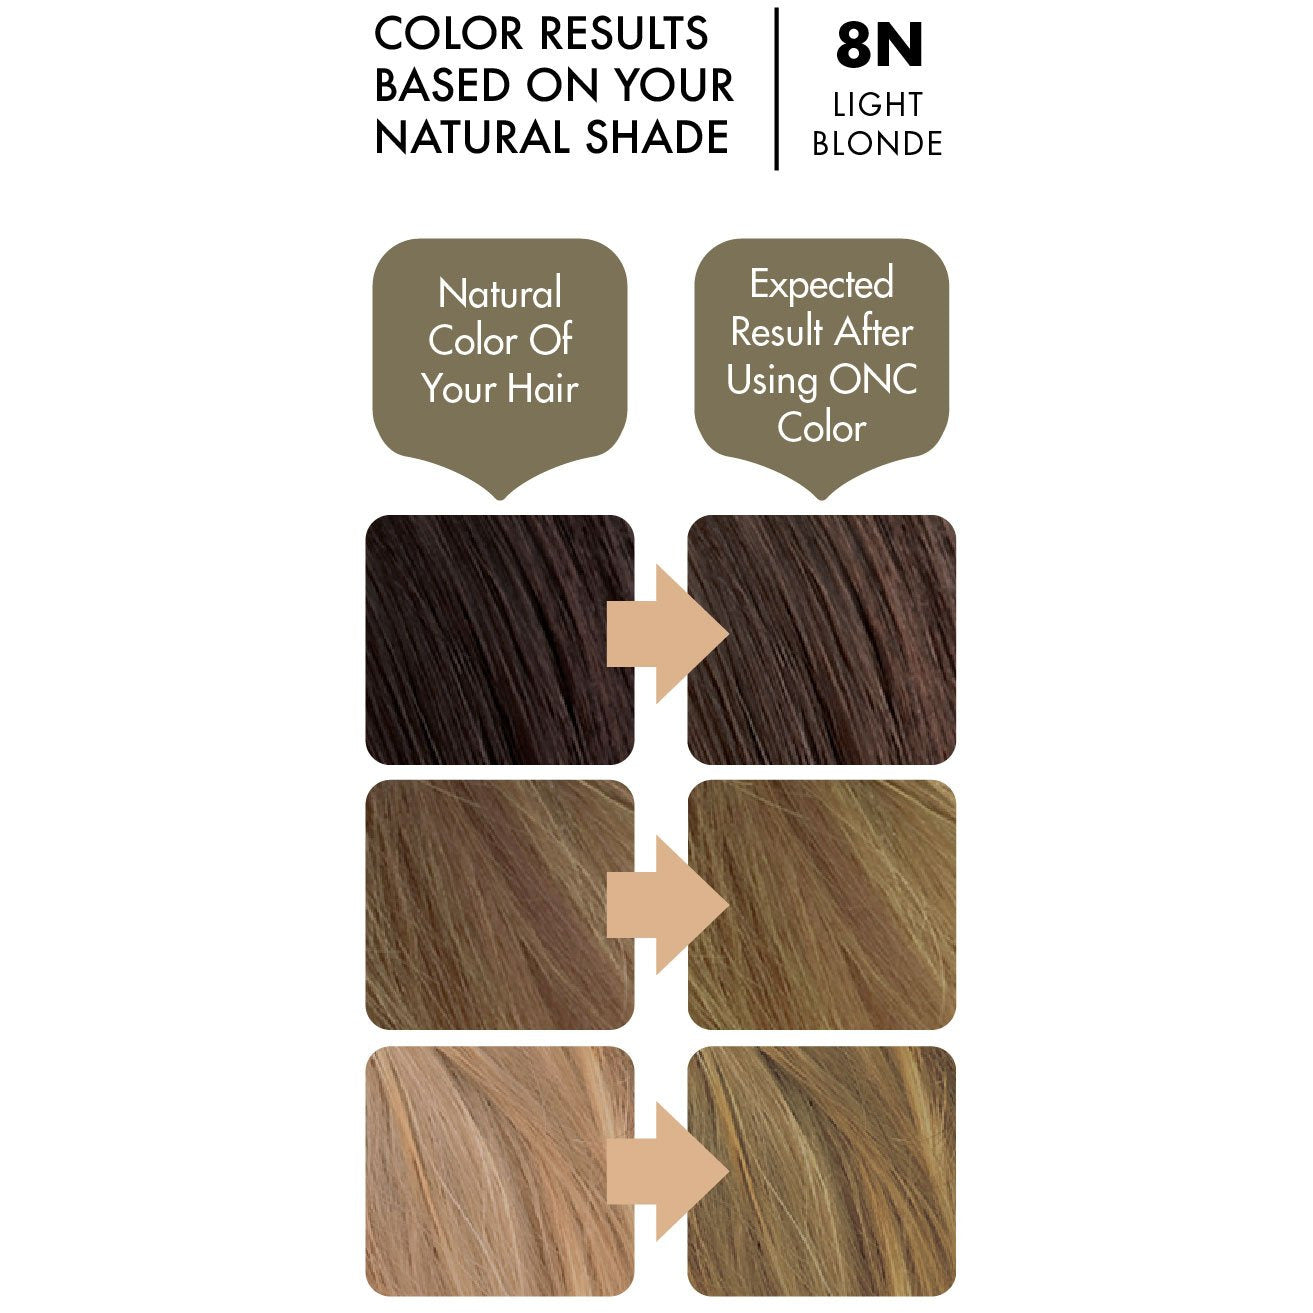 ONC 8N Natural Light Blonde Hair Dye With Organic Ingredients 120 mL / 4 fl. oz. Color Results